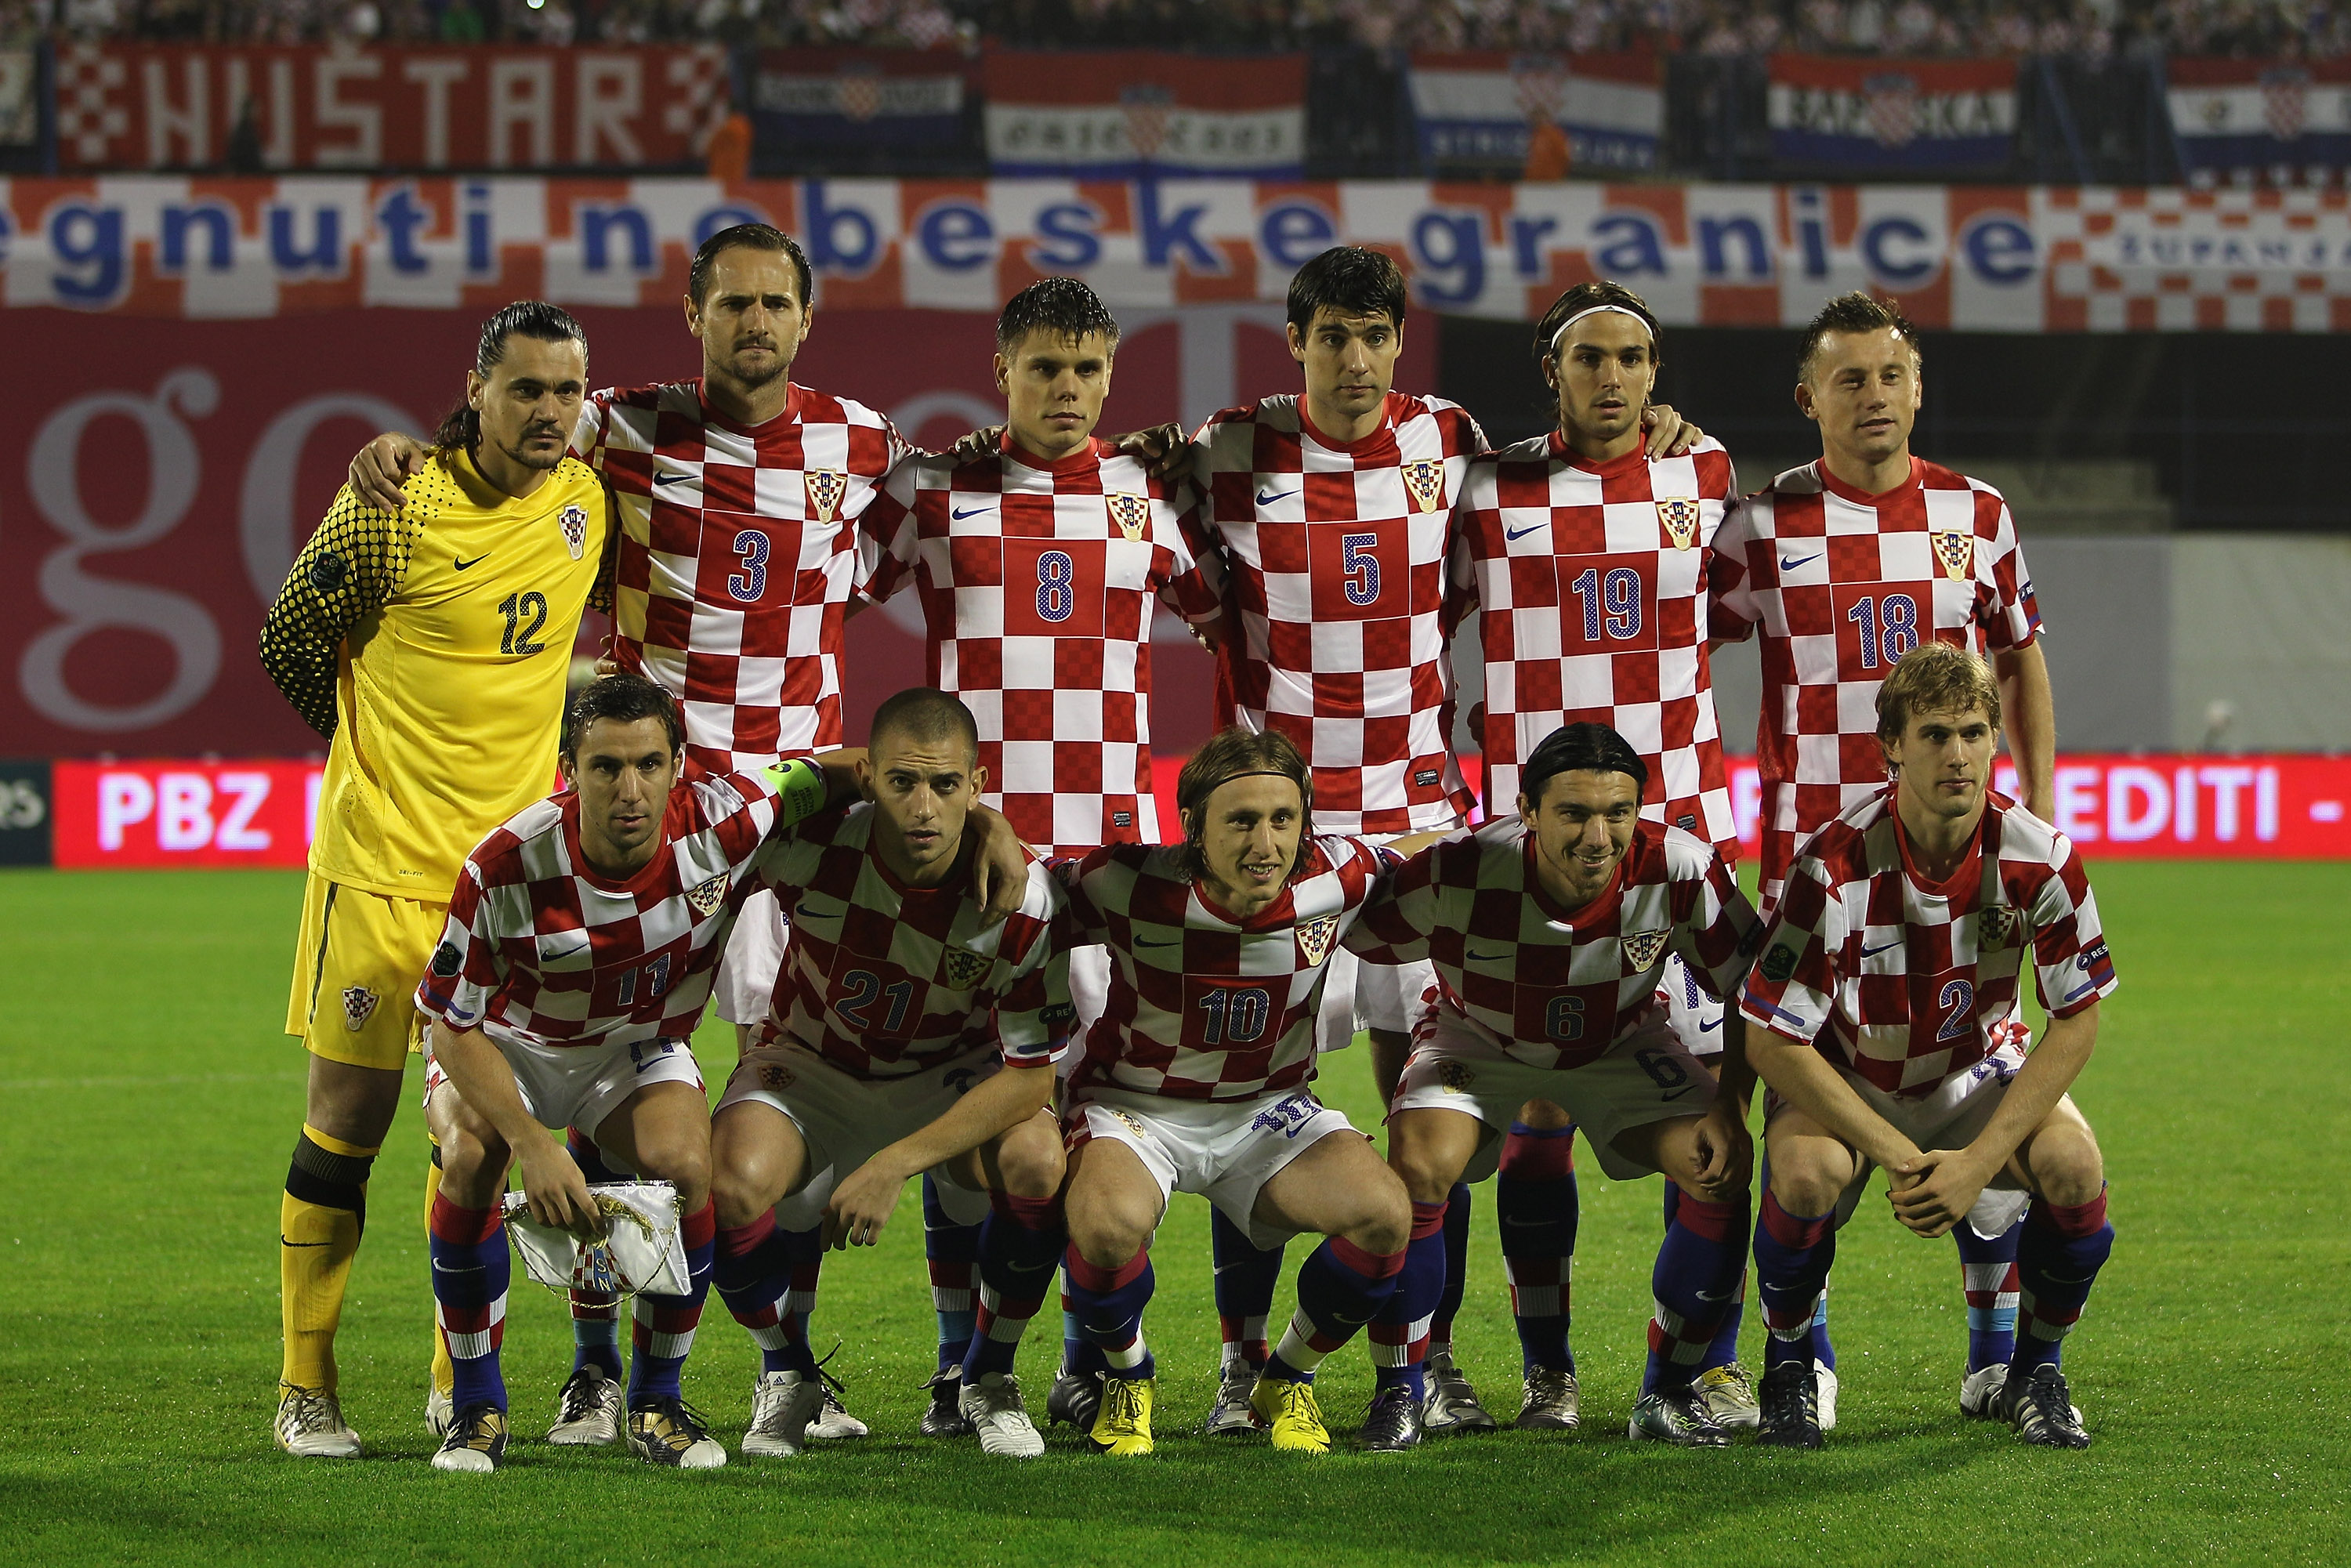 ZAGREB, CROATIA - SEPTEMBER 07:  Croatia team line up during the EURO 2012 Qualifying Group F match between Croatia and Greece at the Stadion Maksimir on September 7, 2010 in Zagreb, Croatia.  (Photo by Michael Steele/Getty Images)